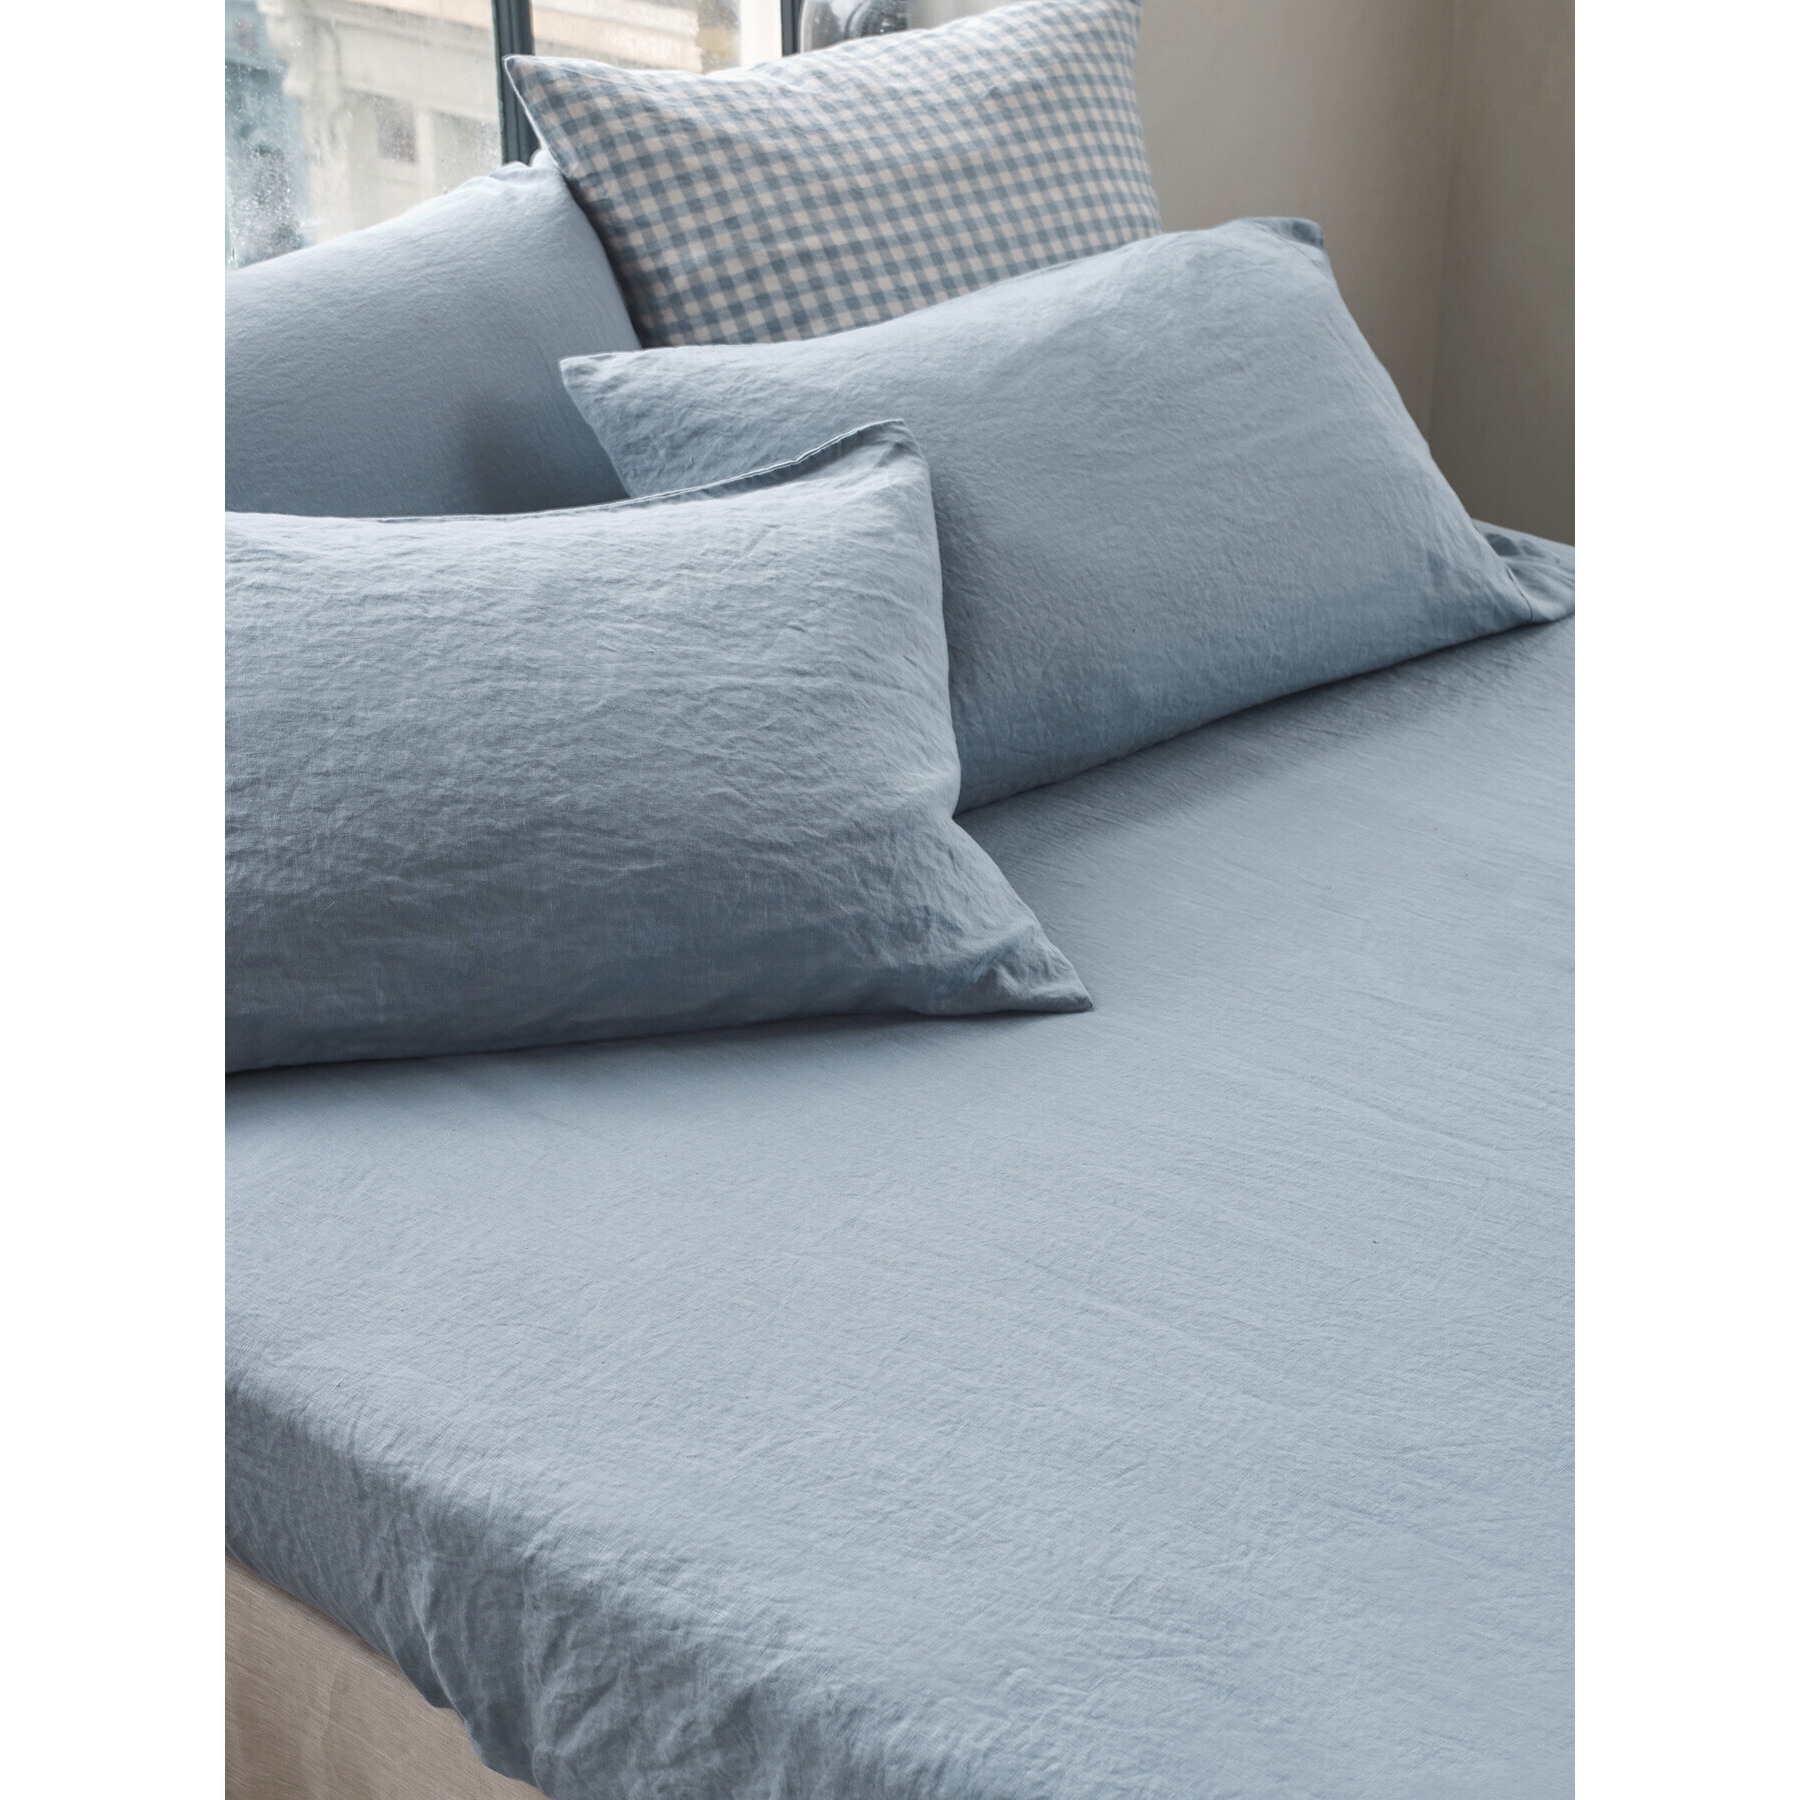 Piglet in Bed Linen Fitted Sheet - Size Double Blue - image 1